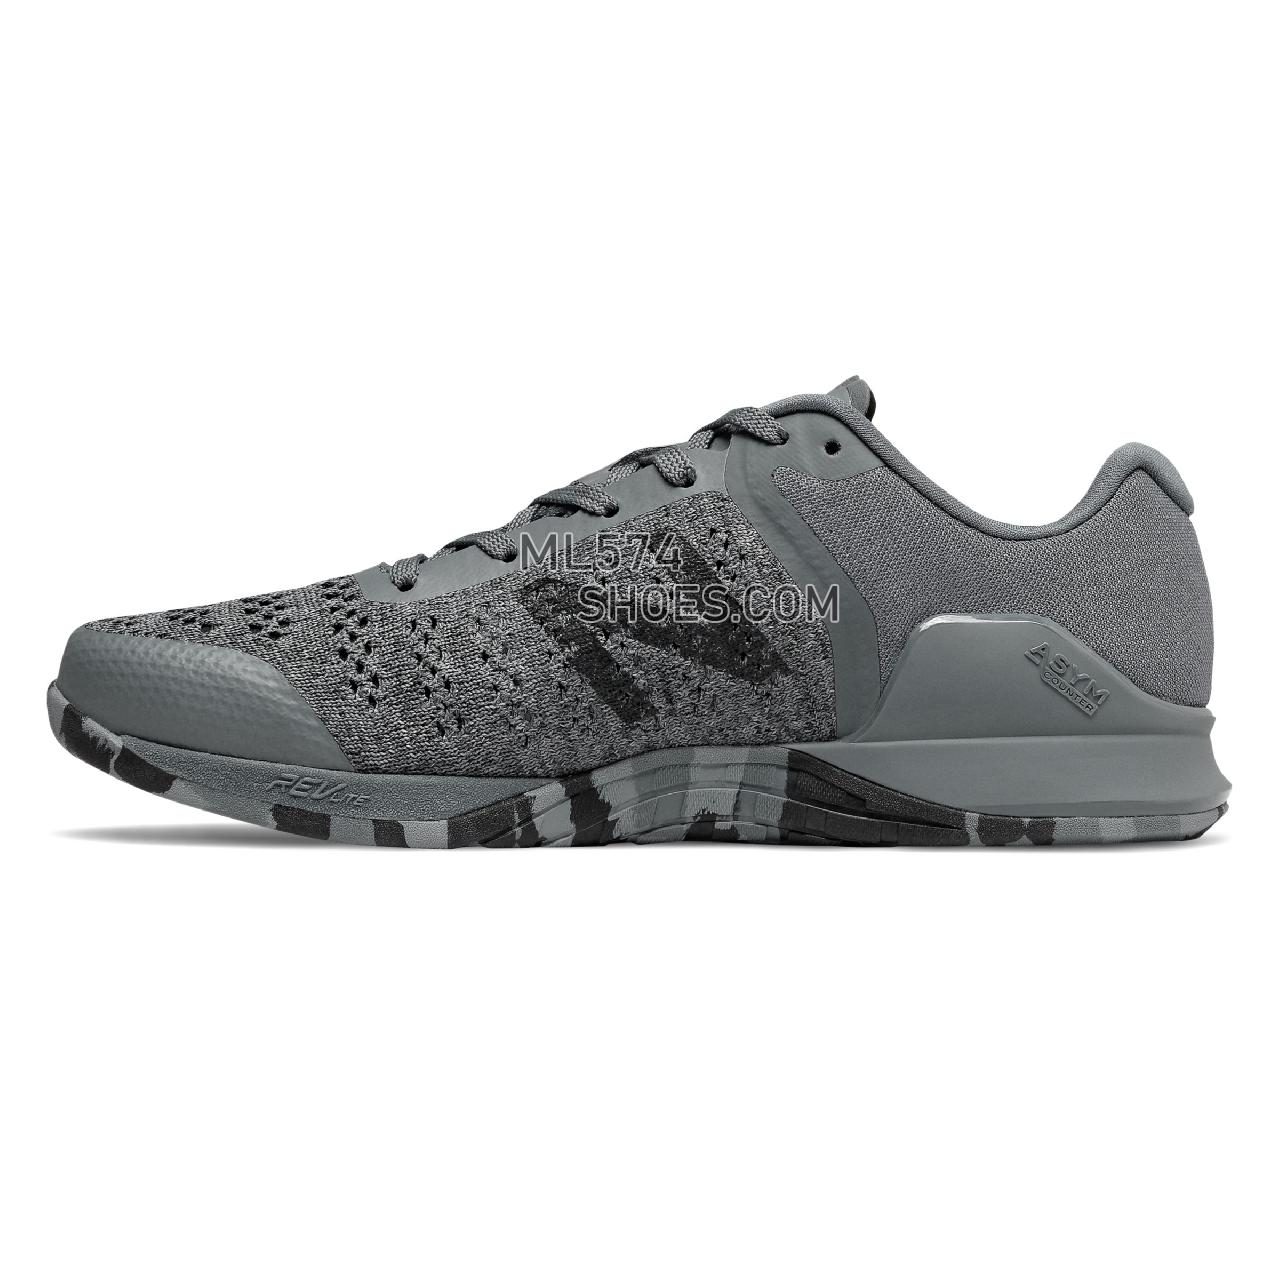 New Balance Minimus Prevail - Men's Cross-Training - Lead with Black and Marblehead - MXMPCG1